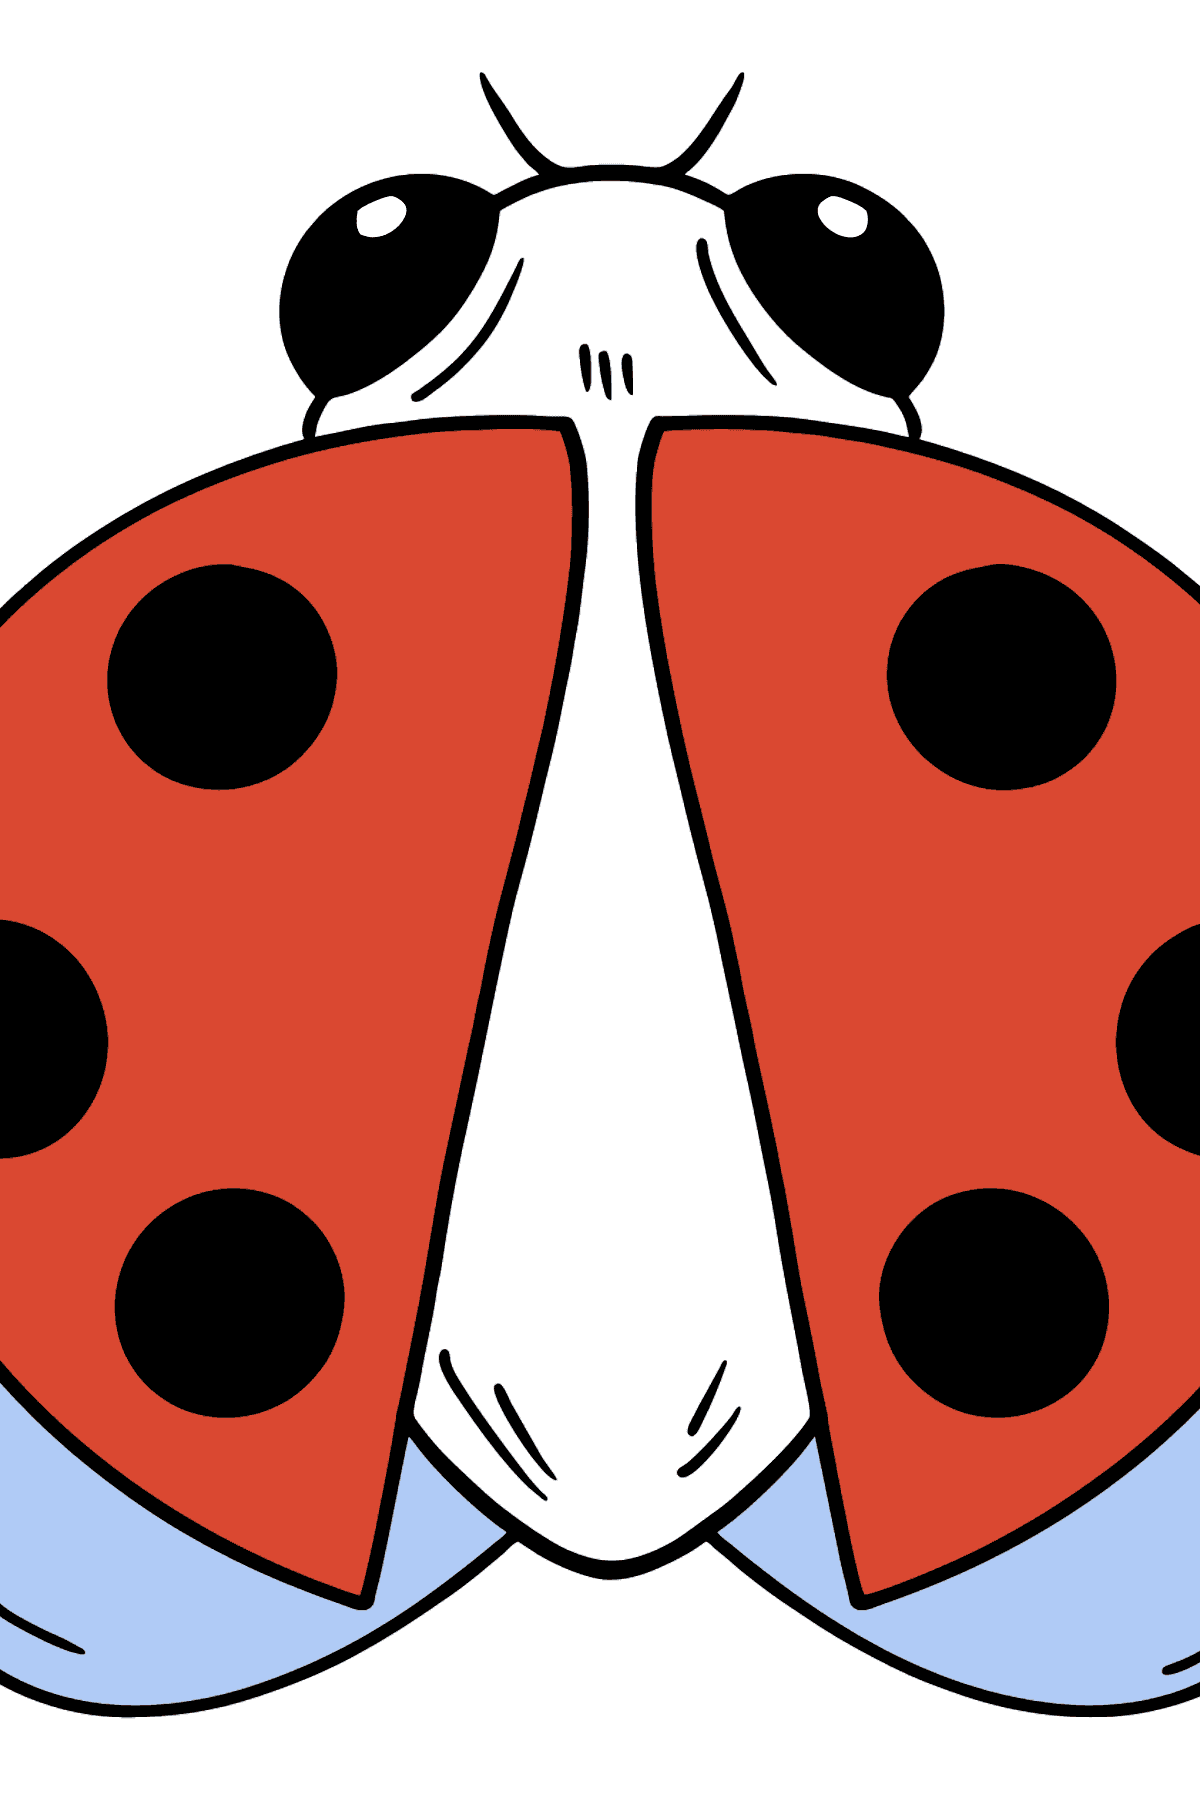 Ladybug coloring page - Coloring Pages for Kids